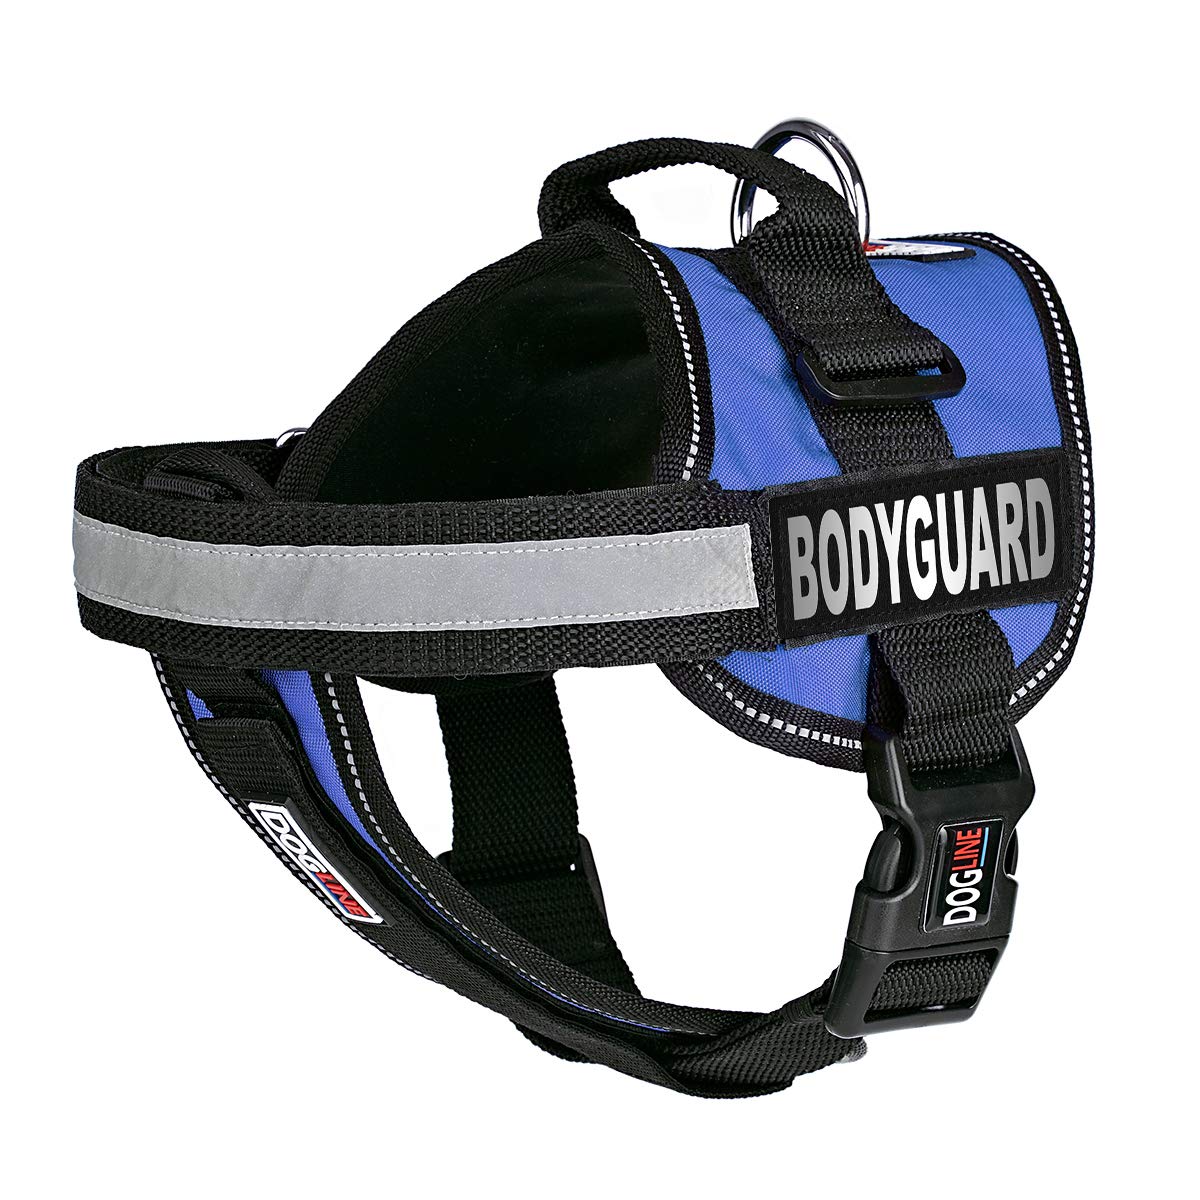 Dogline Unimax Multi-Purpose Vest Harness for Dogs and 2 Removable Bodyguard Patches, X-Small, Blue